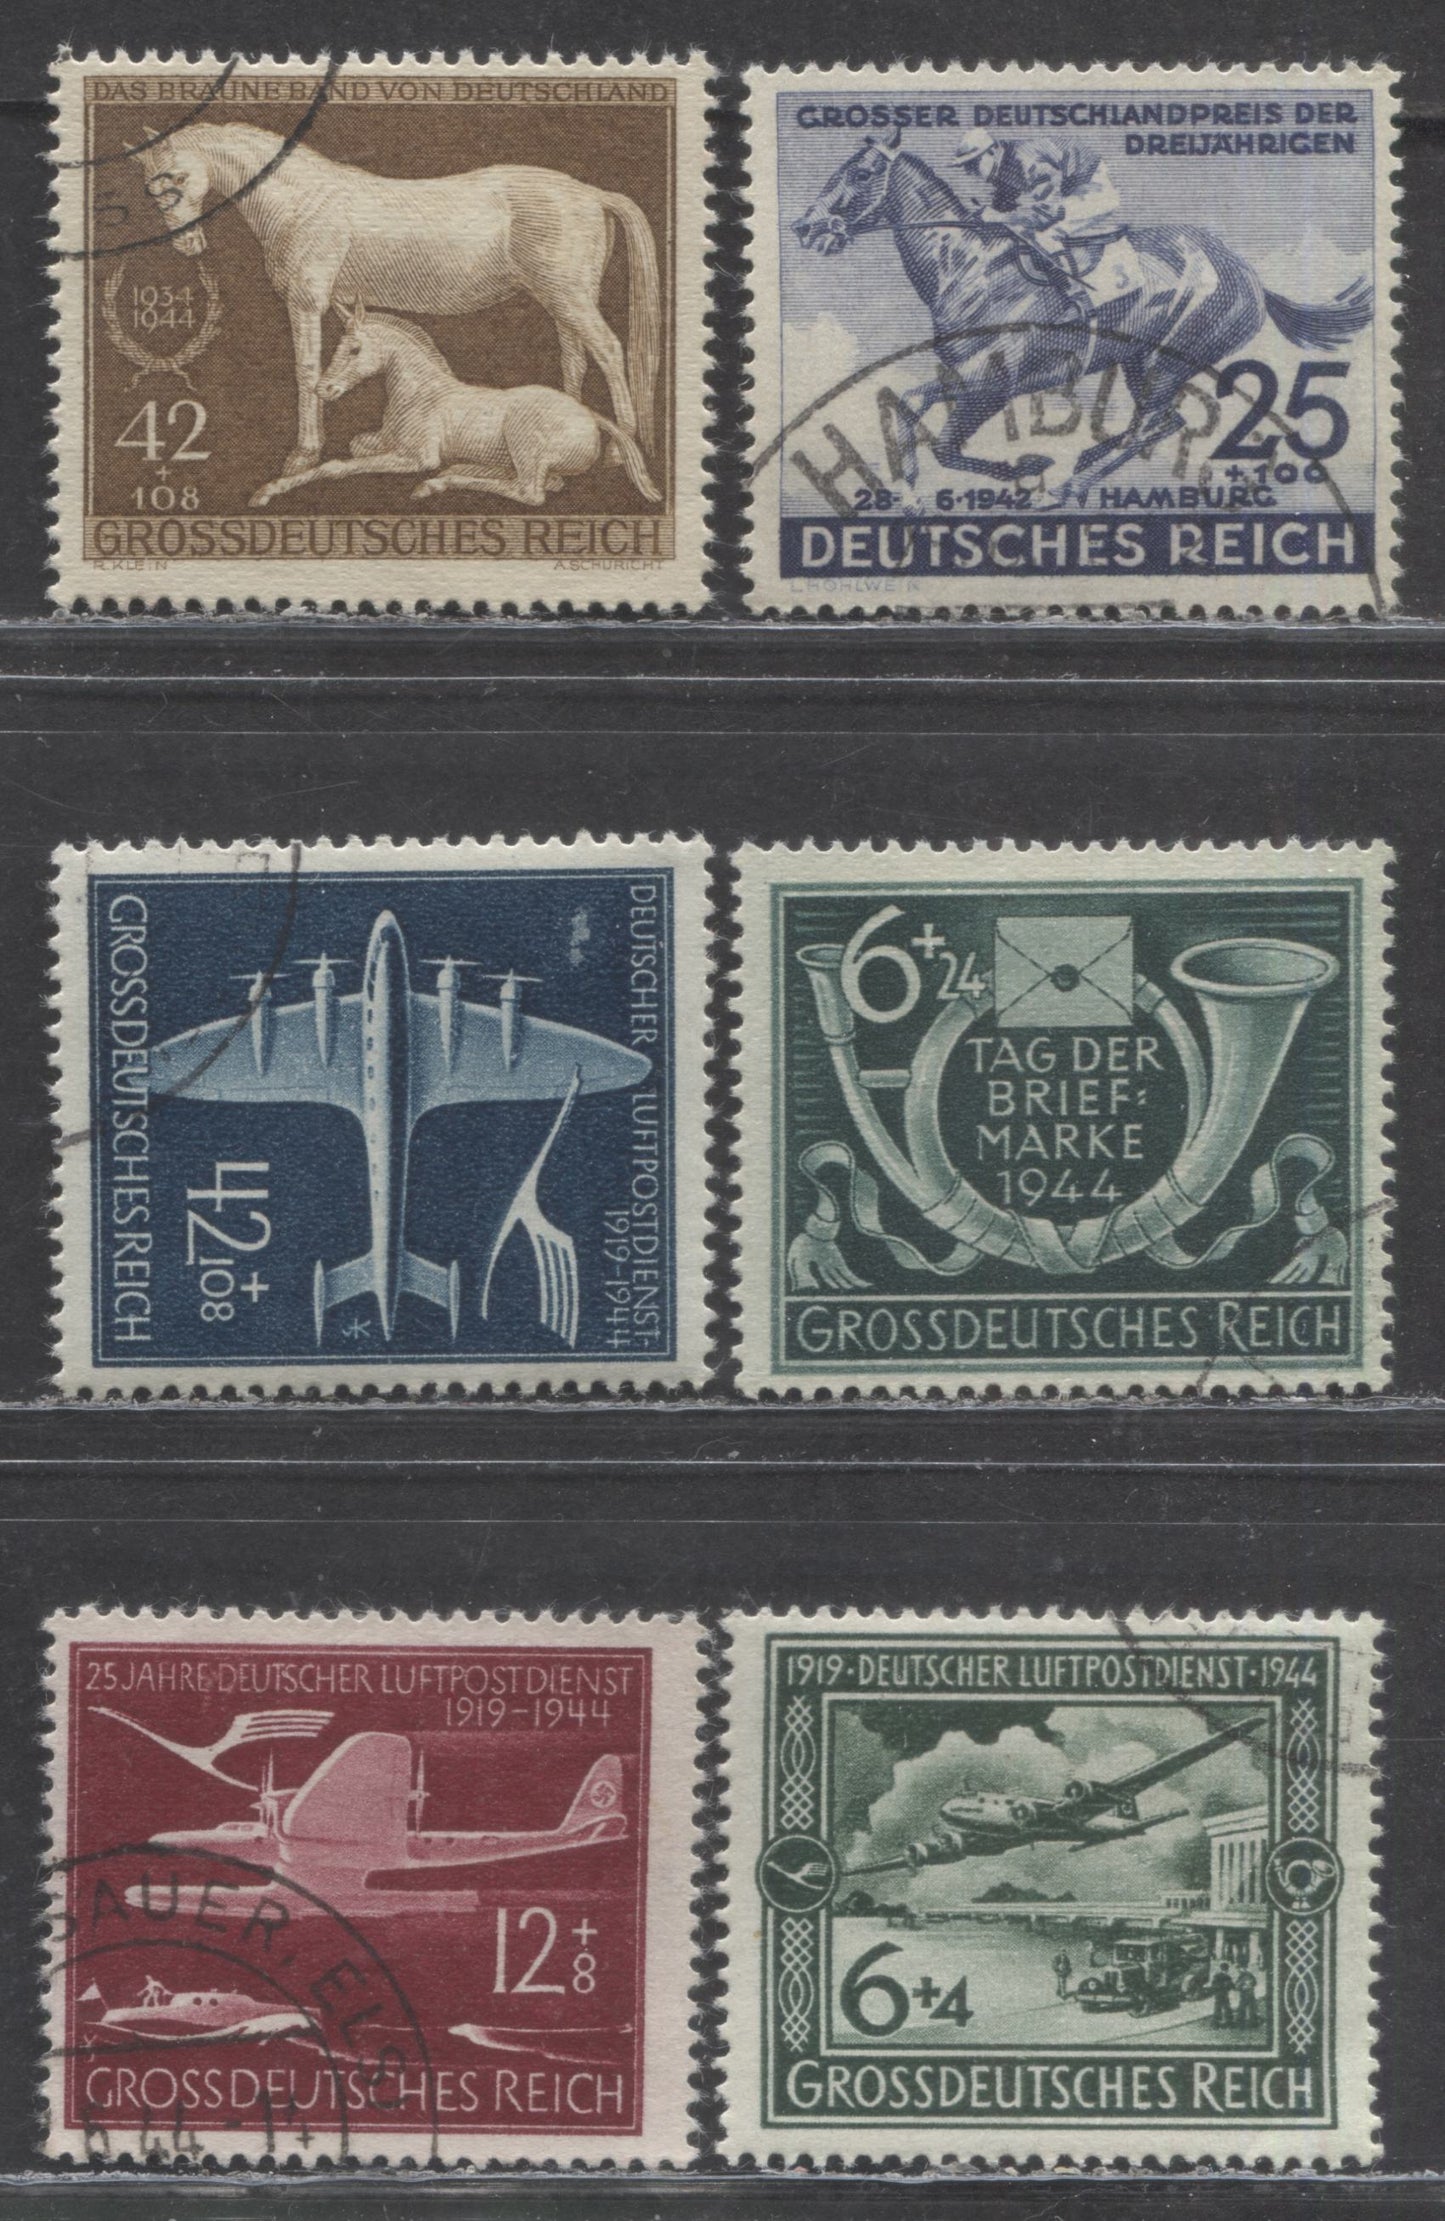 Lot 124 Germany SC#B204/B288 1942-1944 Semi Postals, 6 Fine/Very Fine Used Singles, Click on Listing to See ALL Pictures, 2017 Scott Cat. $11.5 USD